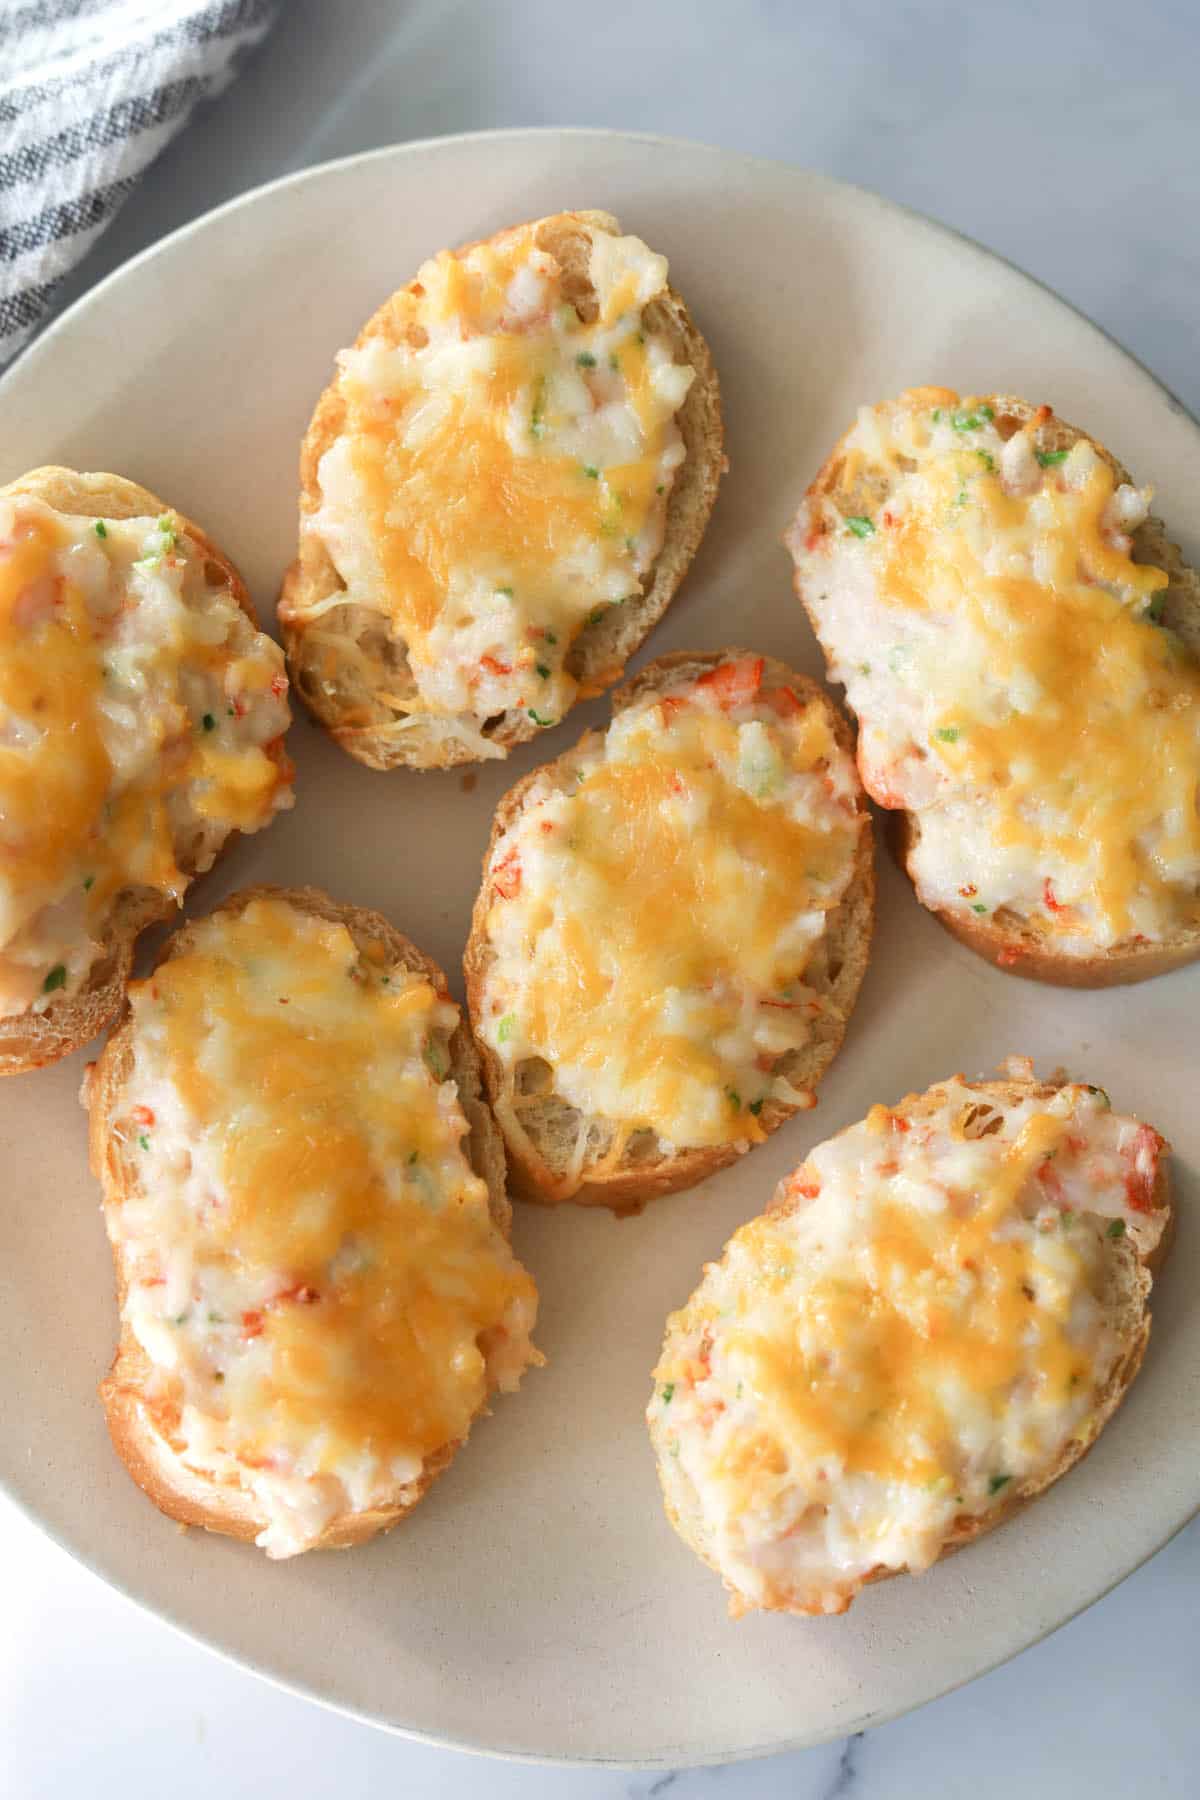 Shrimp topped with cheese on toast.